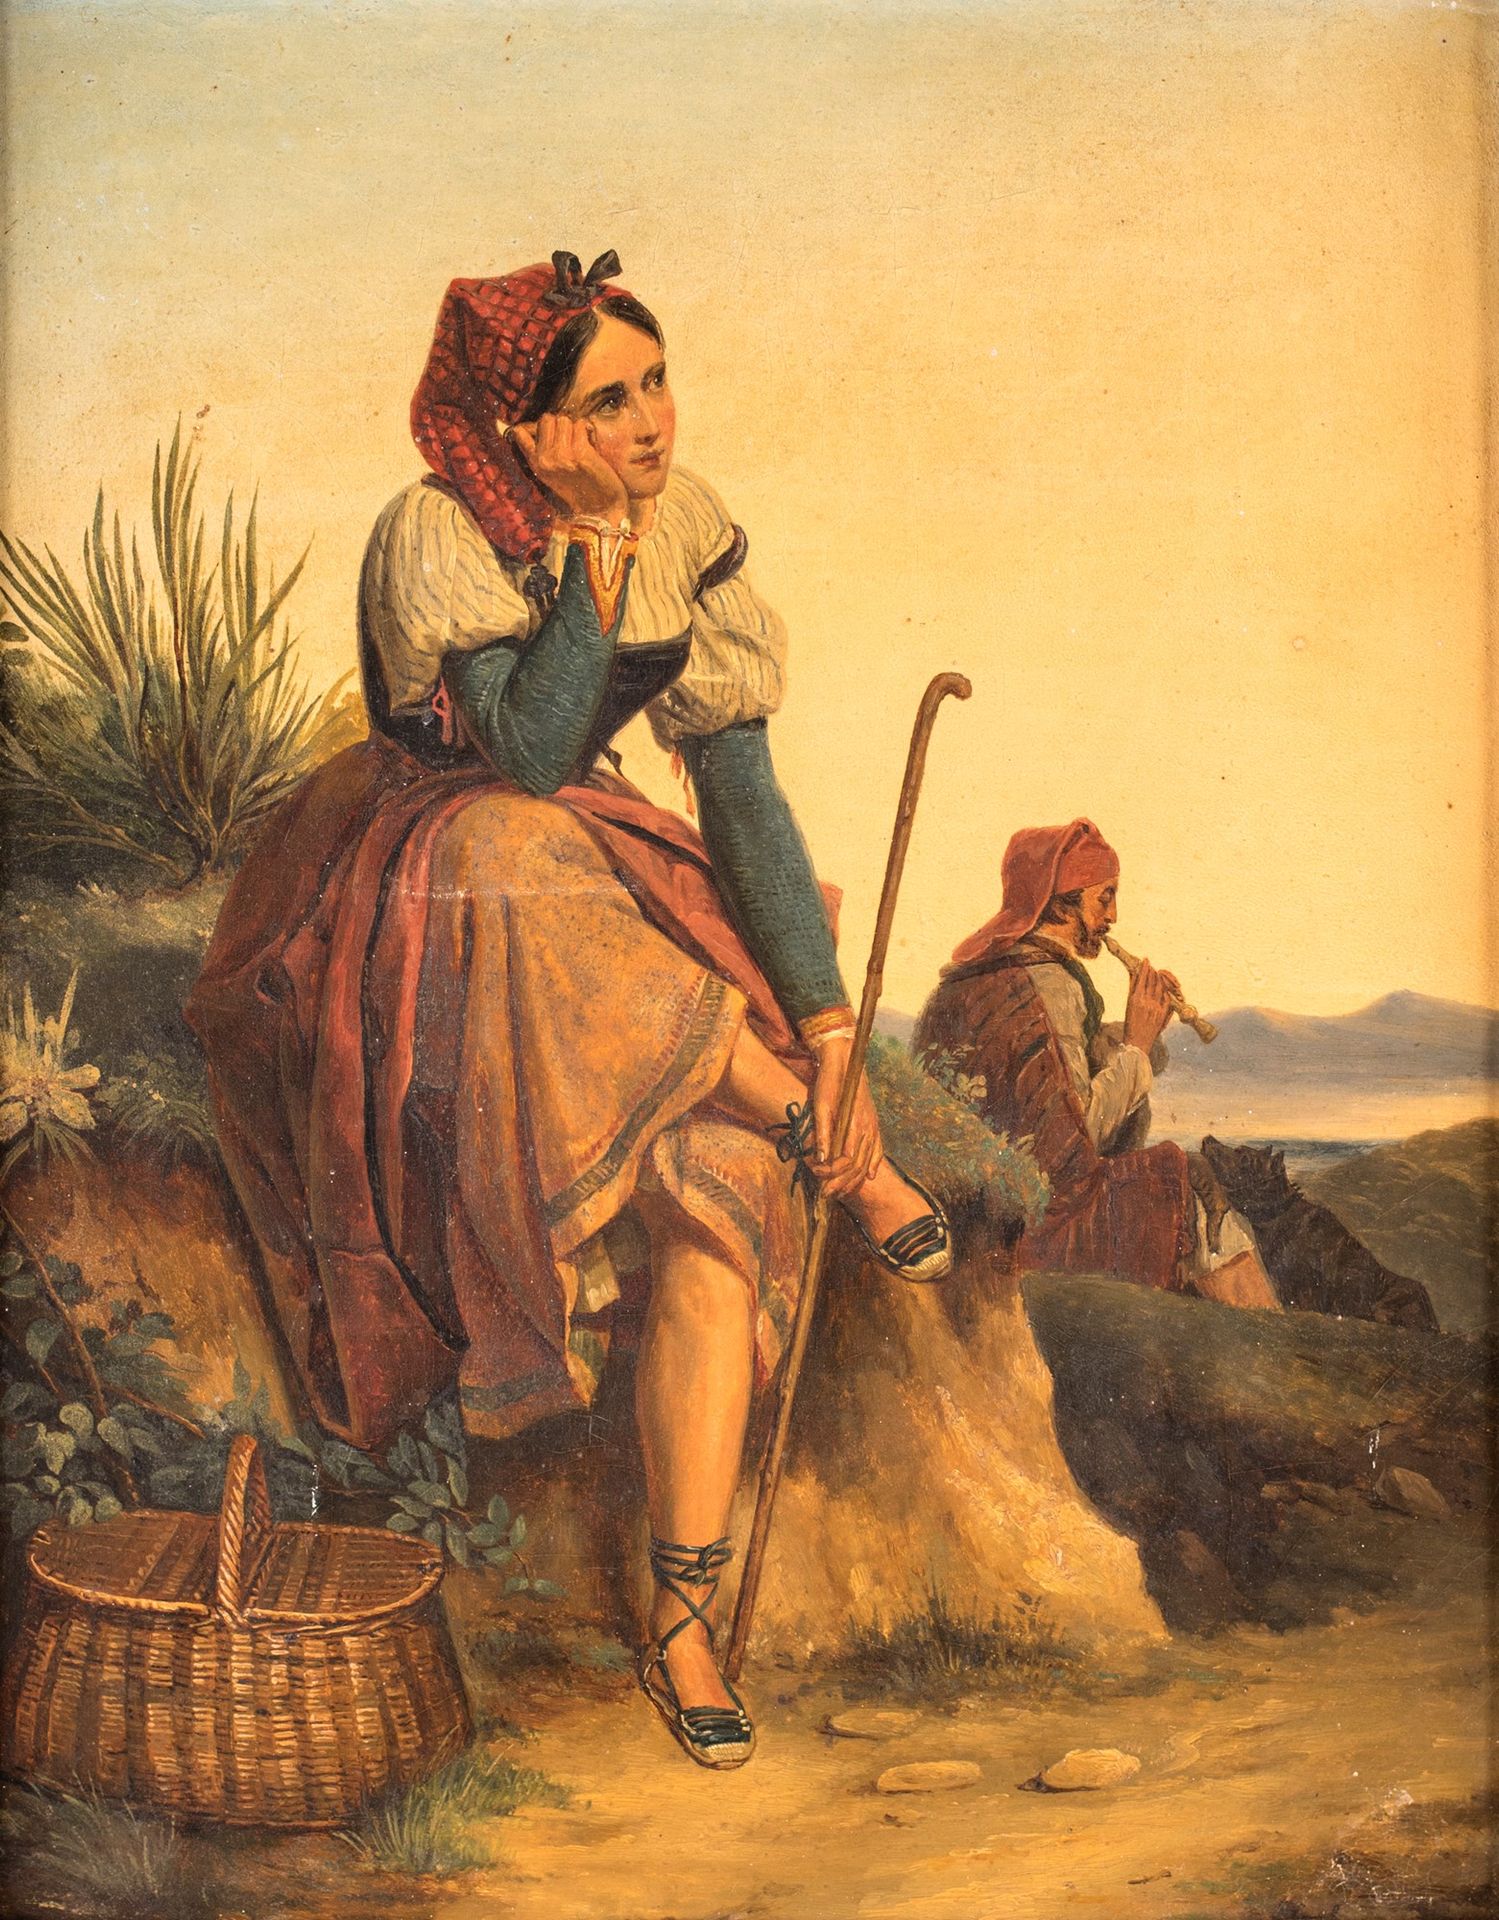 Pittore del XIX secolo Shepherdess Oil painting on canvas